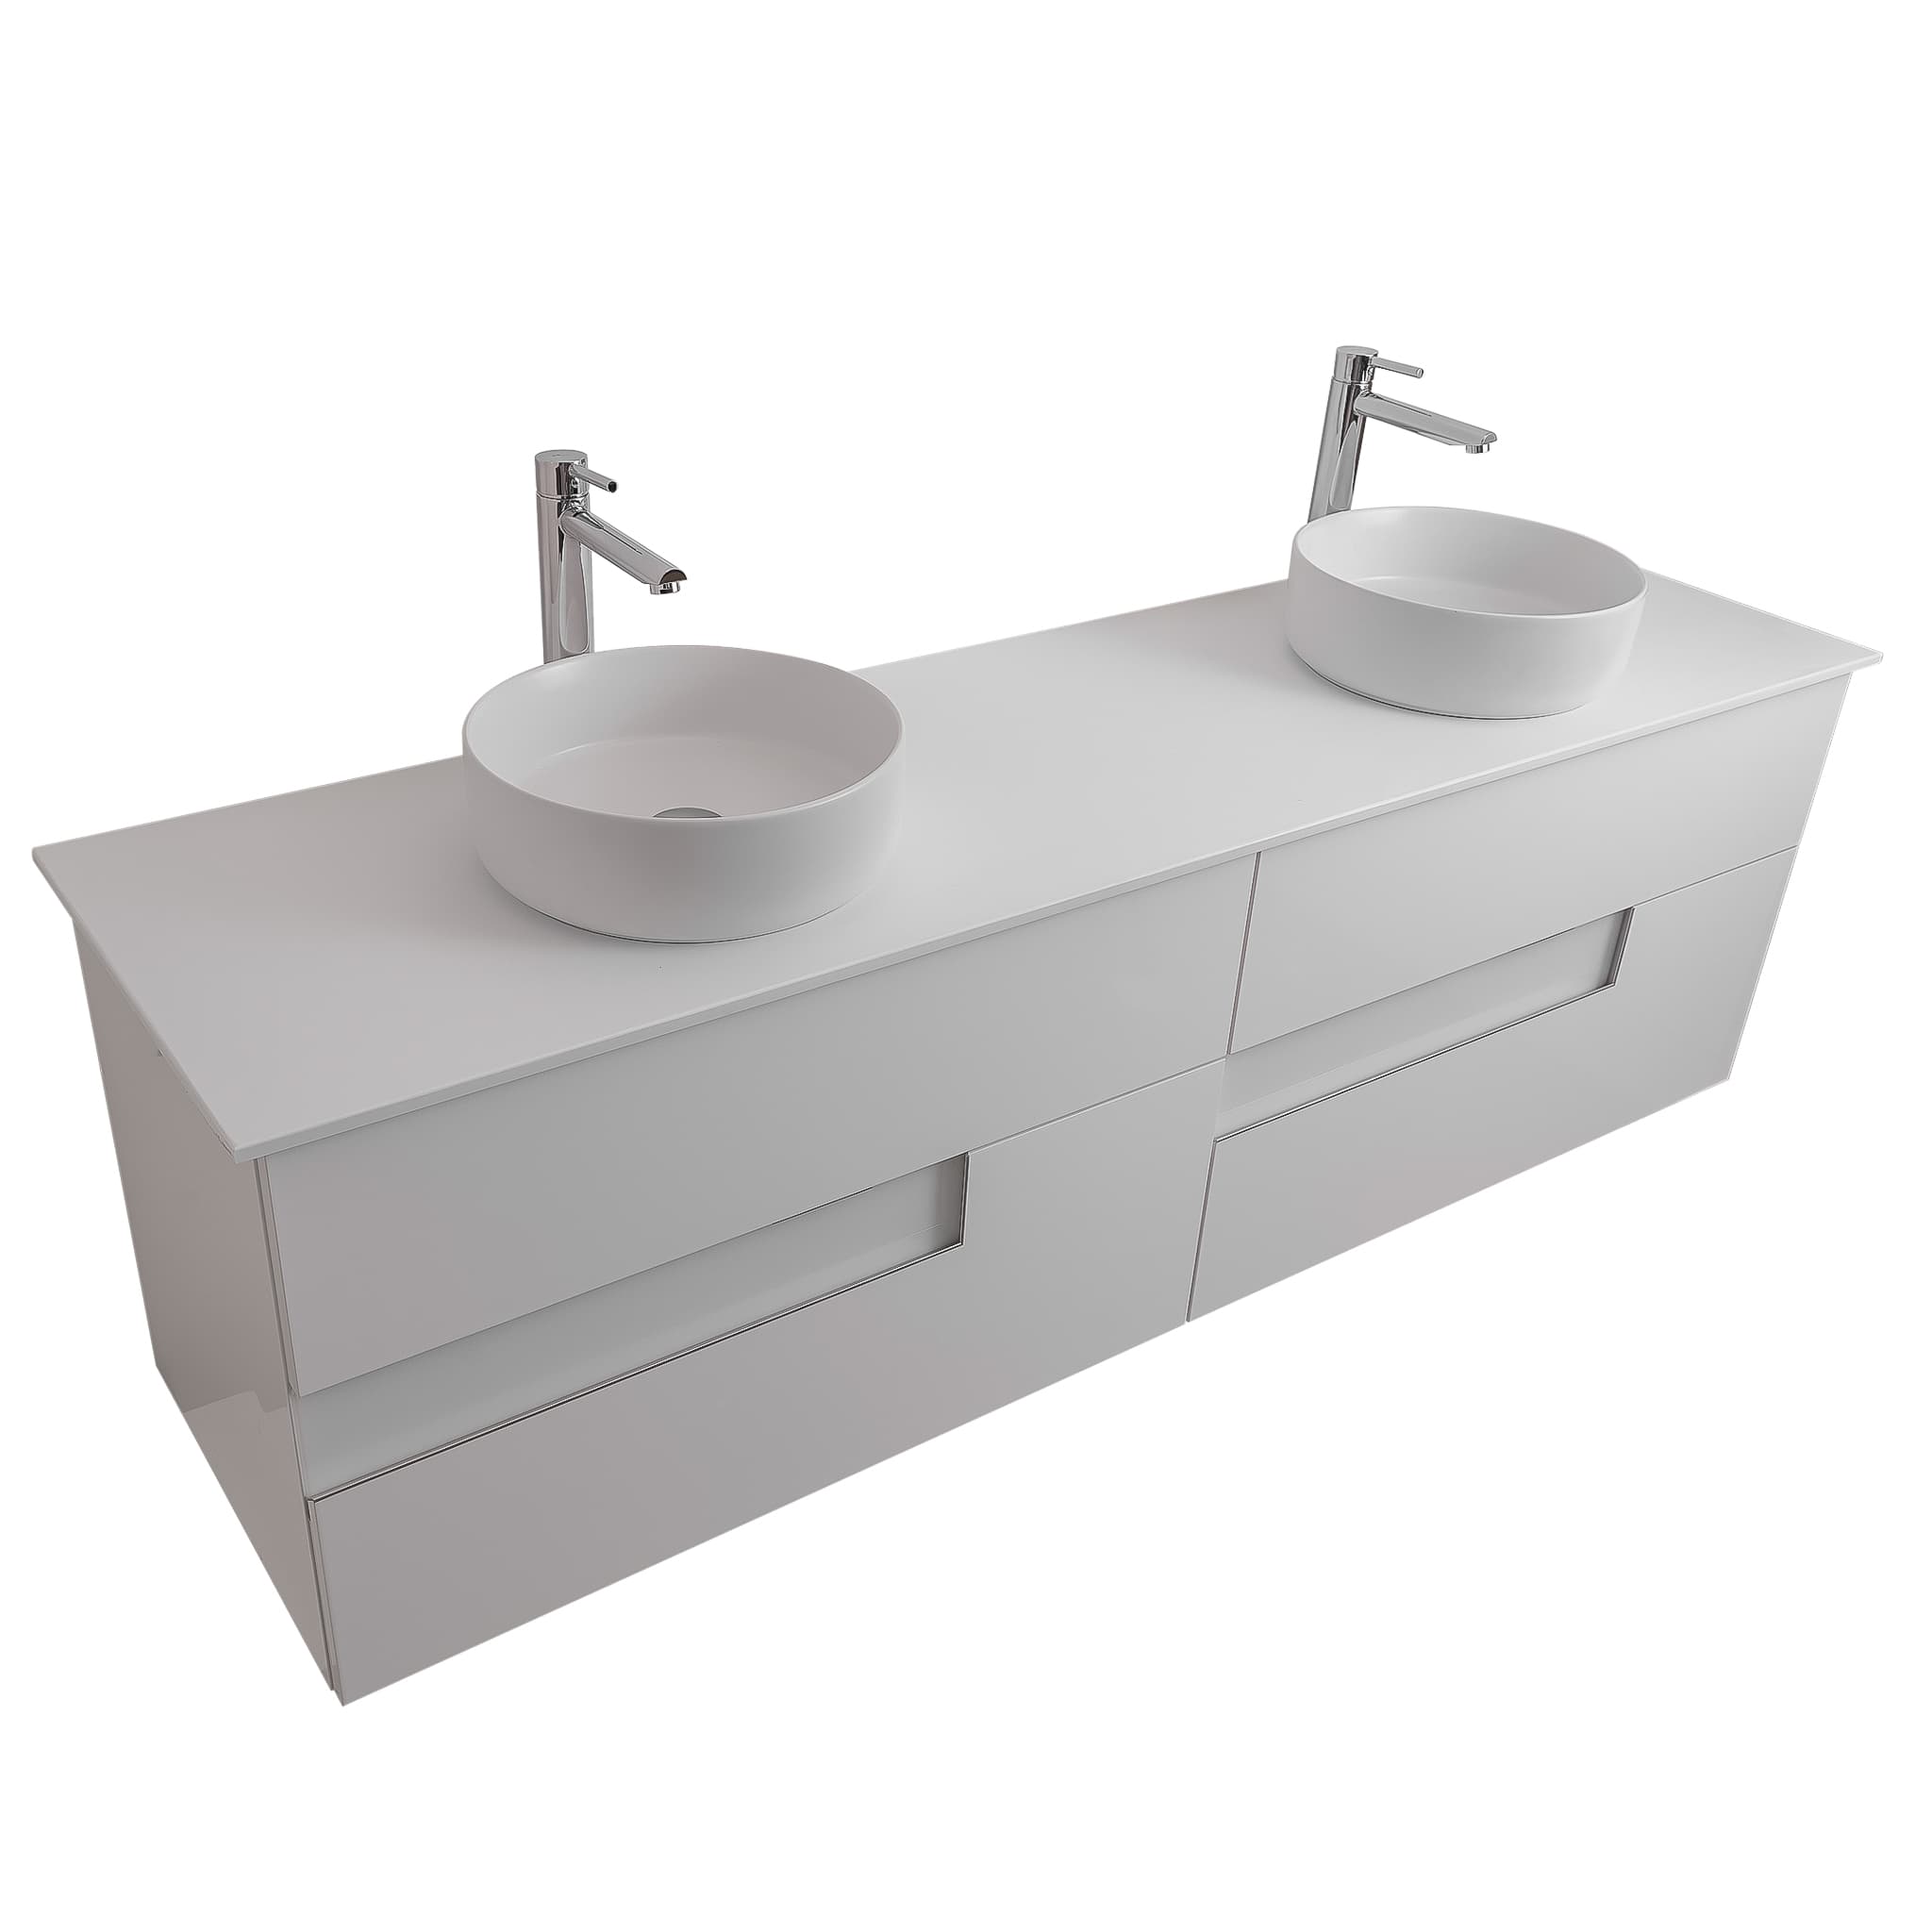 Vision 72 White High Gloss Cabinet, Ares White Top And Two Ares White Ceramic Basin, Wall Mounted Modern Vanity Set